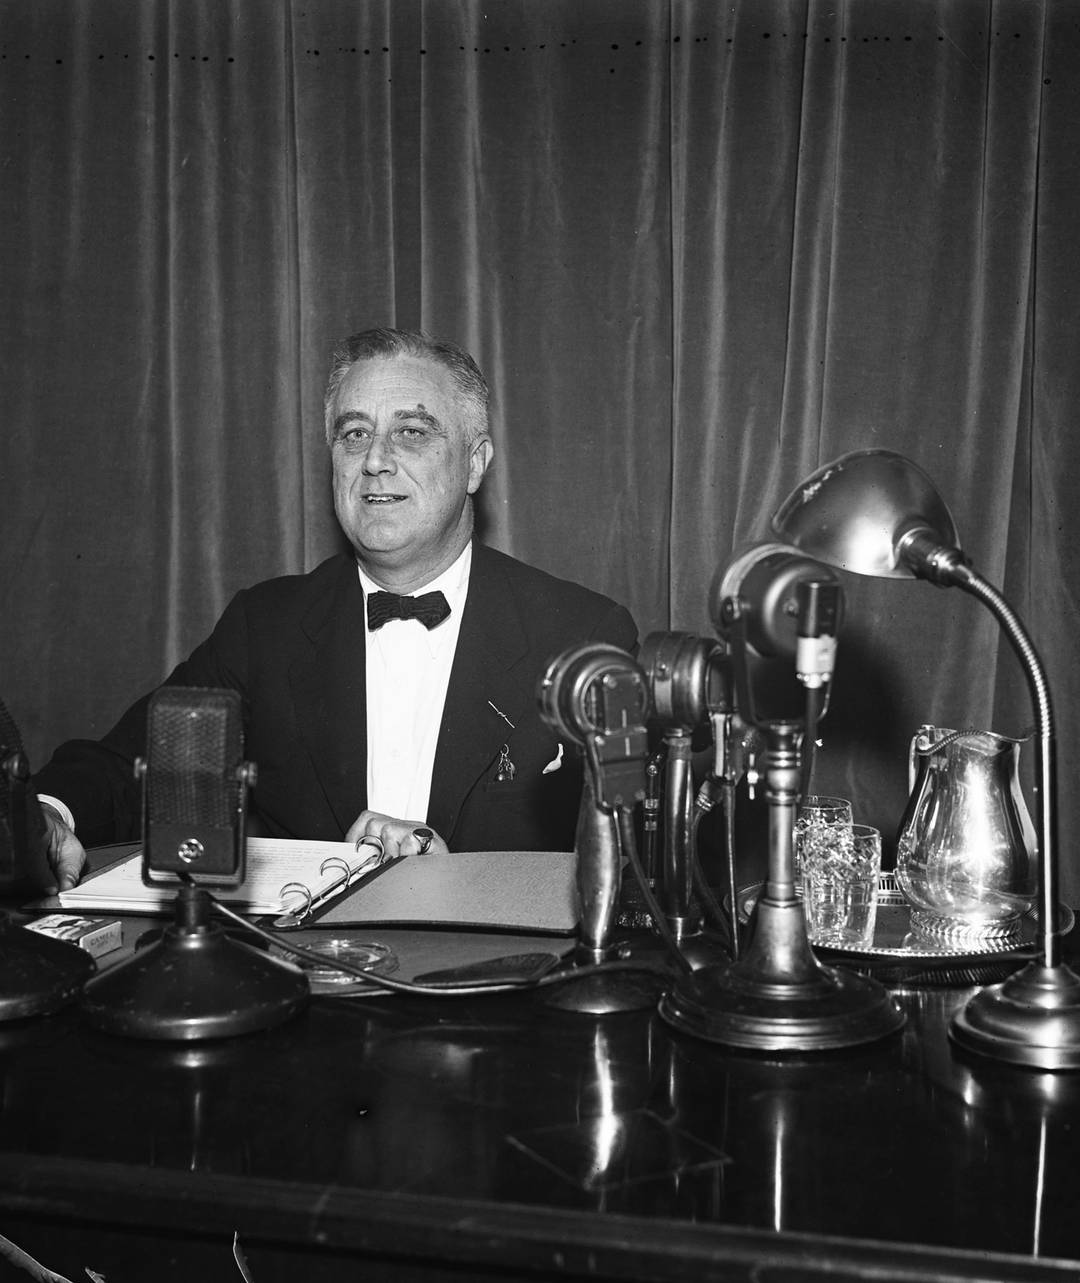 Franklin D. Roosevelt photographed during his 1937 fireside chat, an effort to mobilize public support for his court-packing scheme